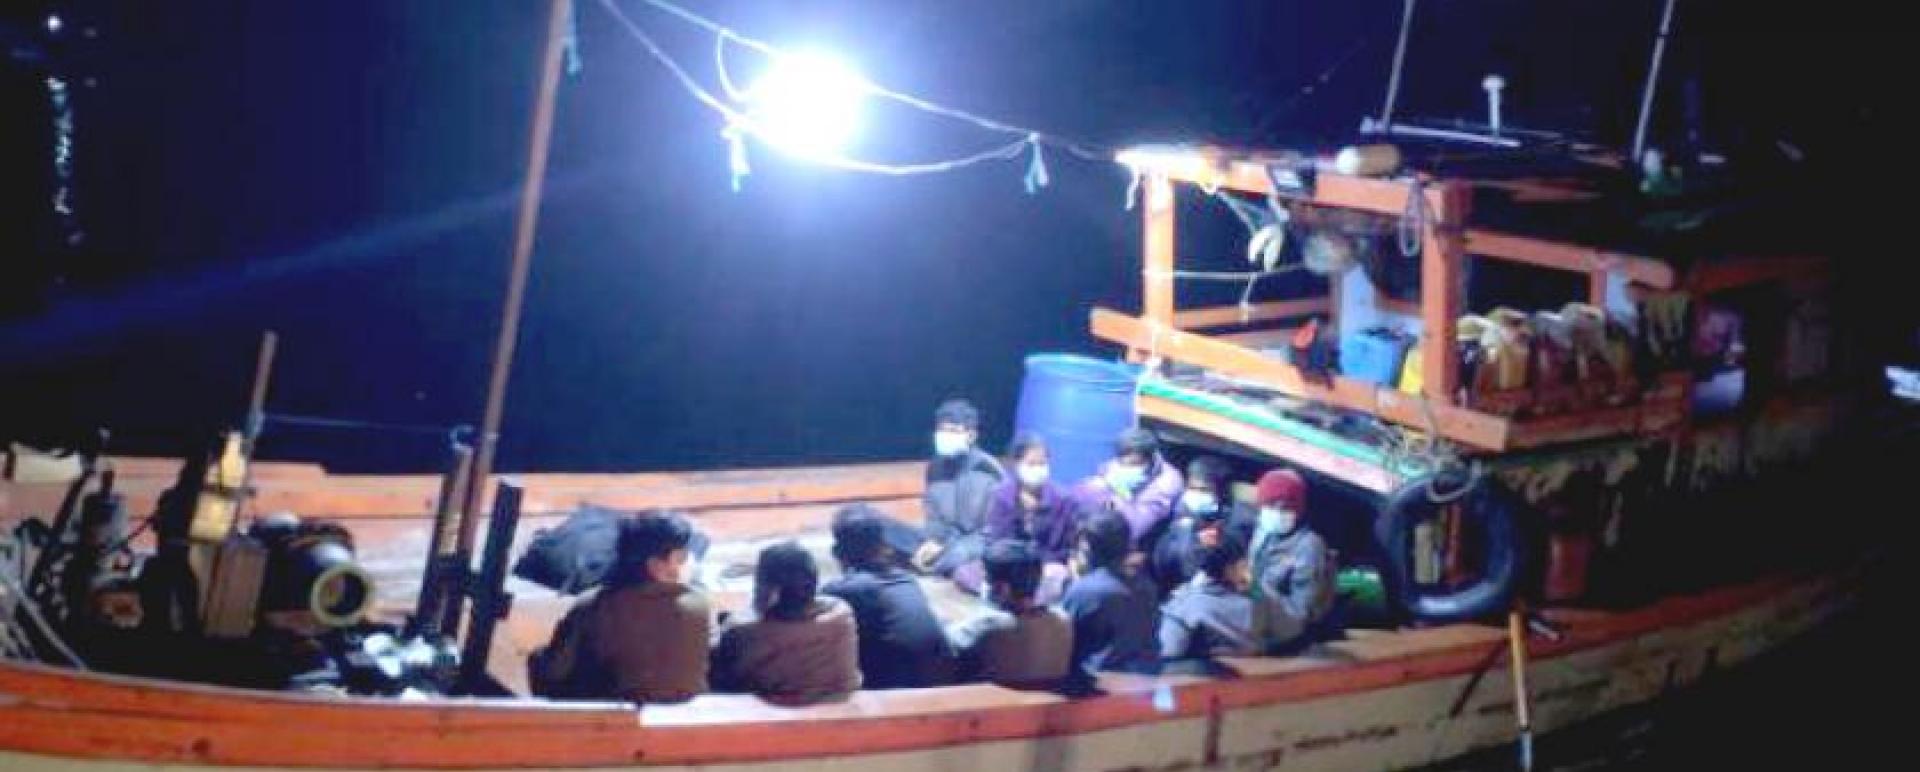 The arrested Bengalis were seen on a boat